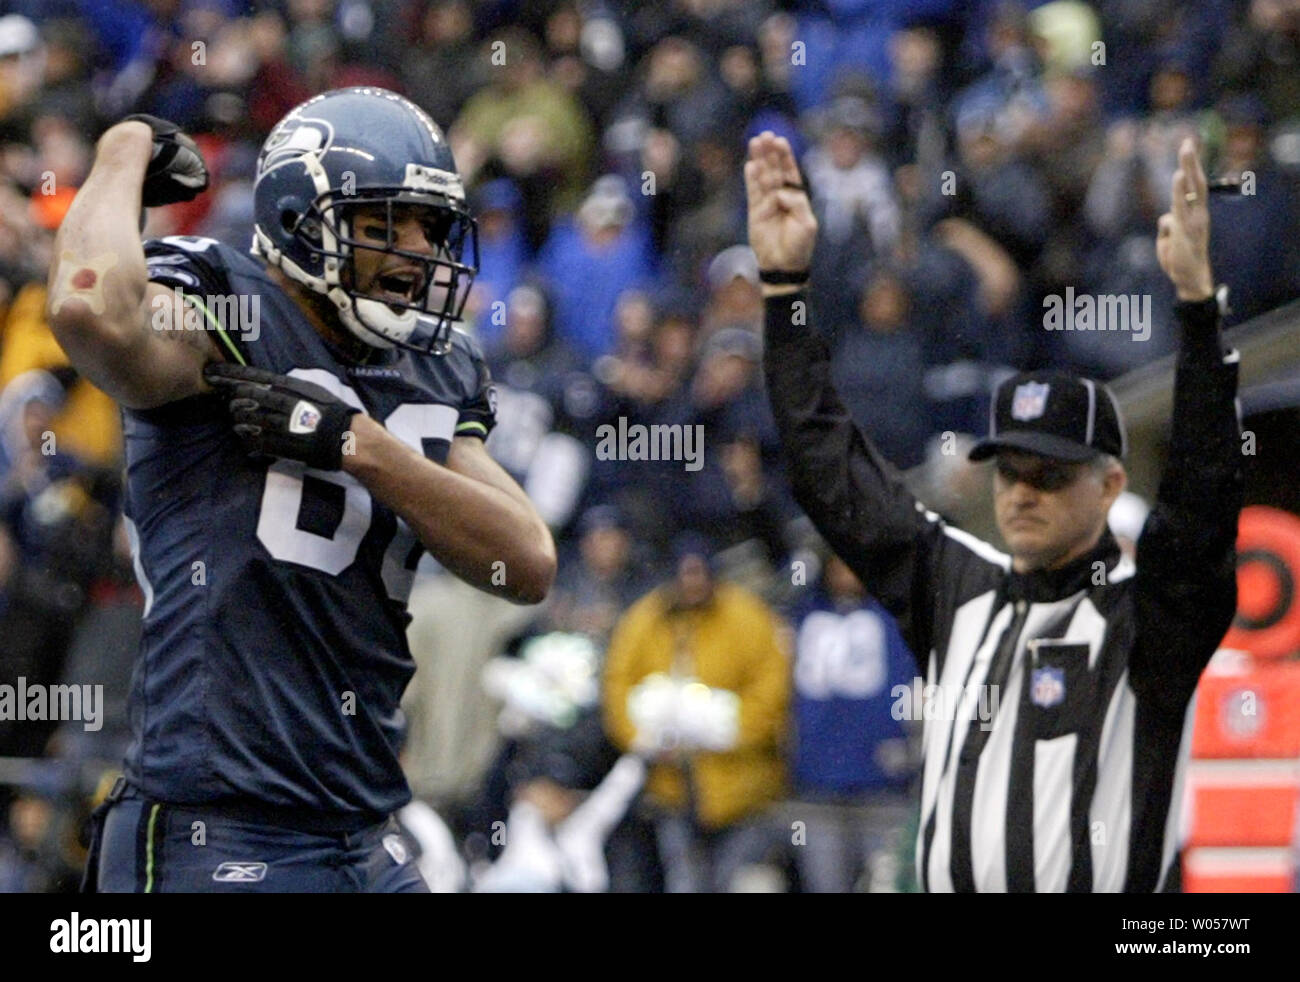 Seattle Seahawks tight end Jerramy Stevens celebrates a touchdown completion from  Seneca Wallace in the second quarter against the St. Louis Rams, at Qwest Field in Seattle on November 12, 2006.  (UPI Photo/Jim Bryant) Stock Photo